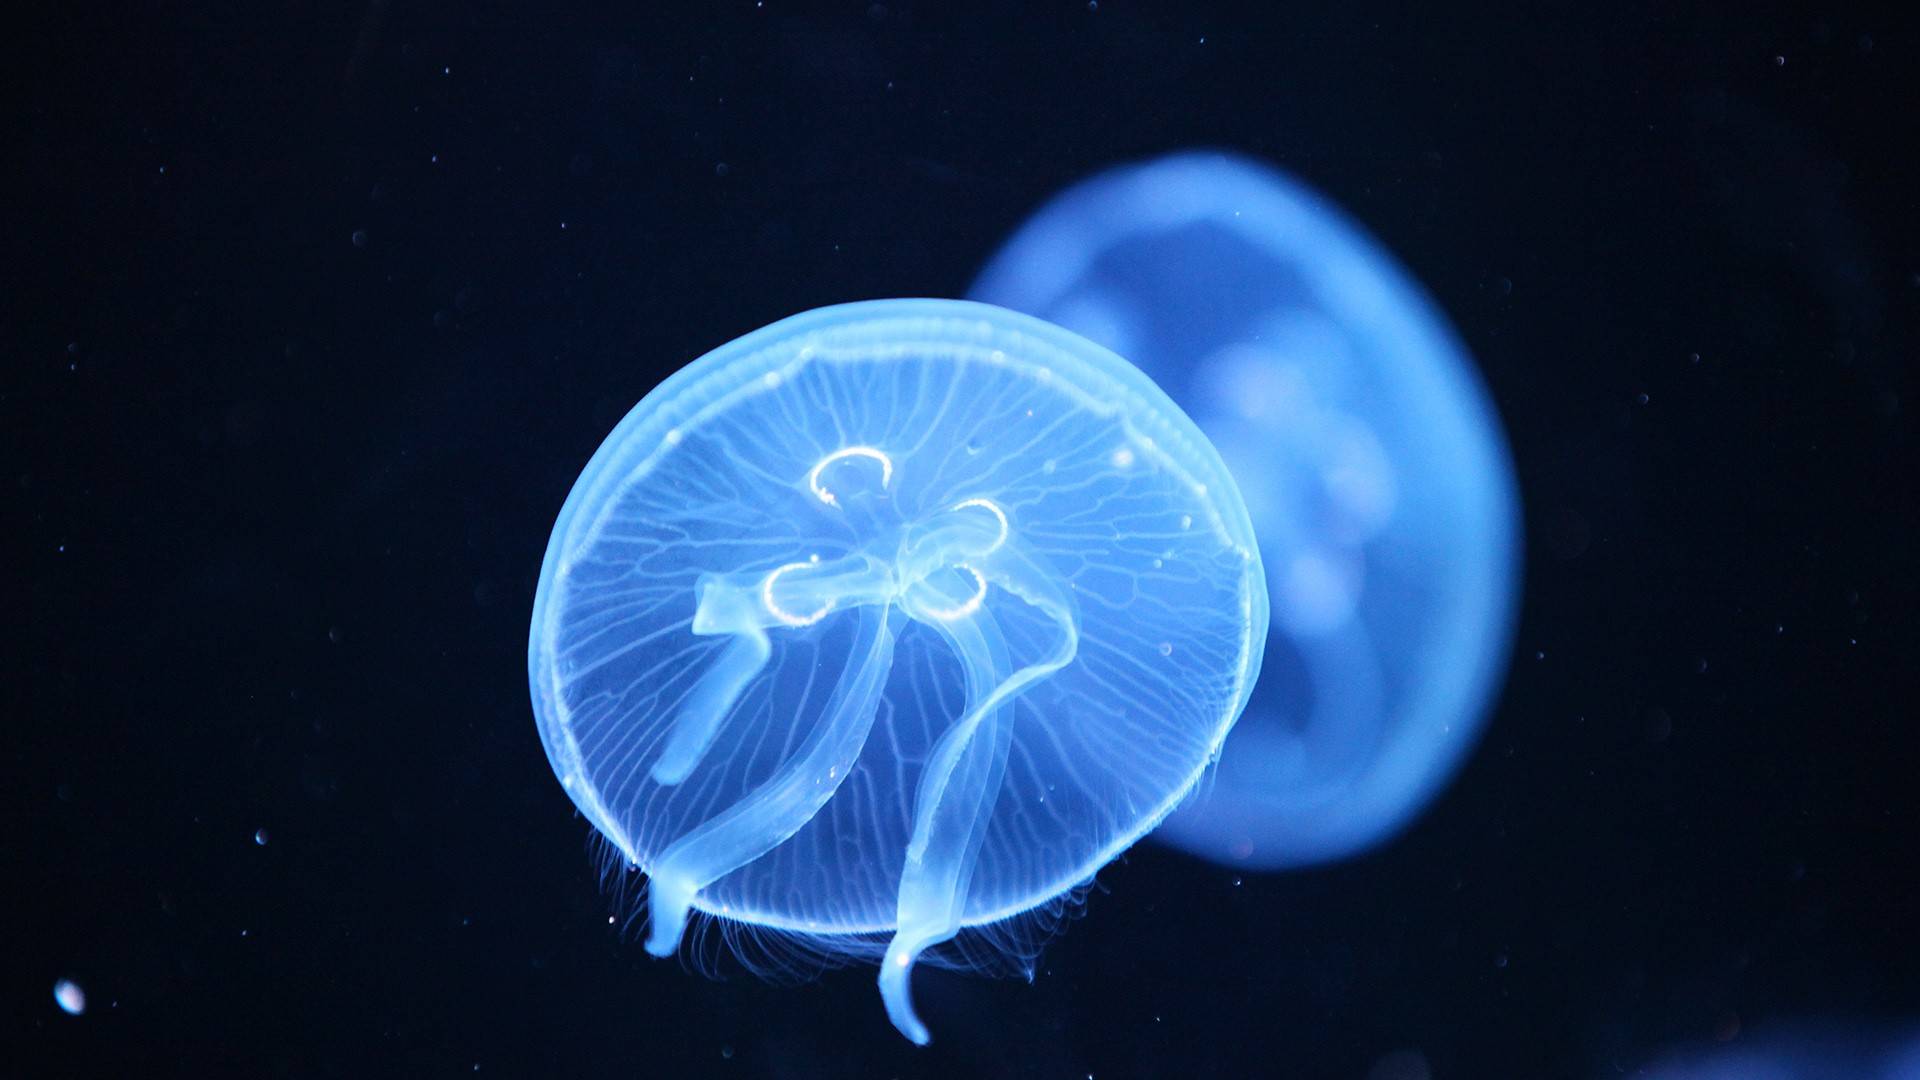 Blue Jellyfish Image, HD Wallpaper available in different